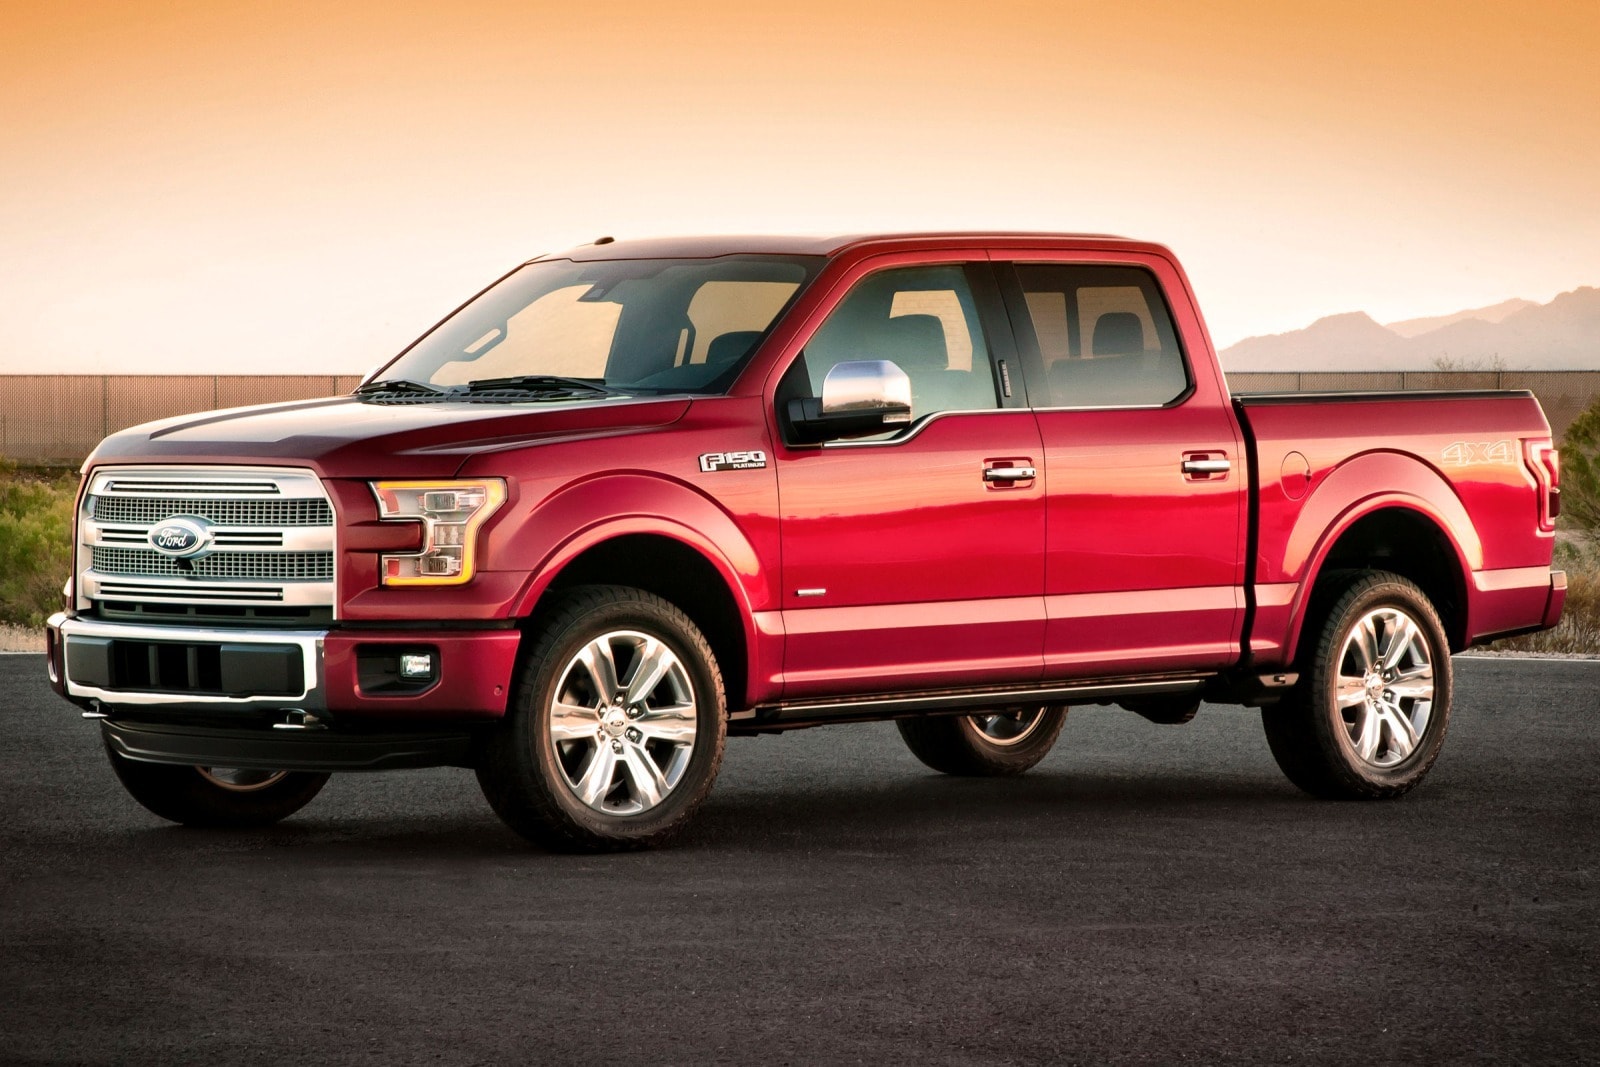 The Best Way to Lease a Pickup Truck